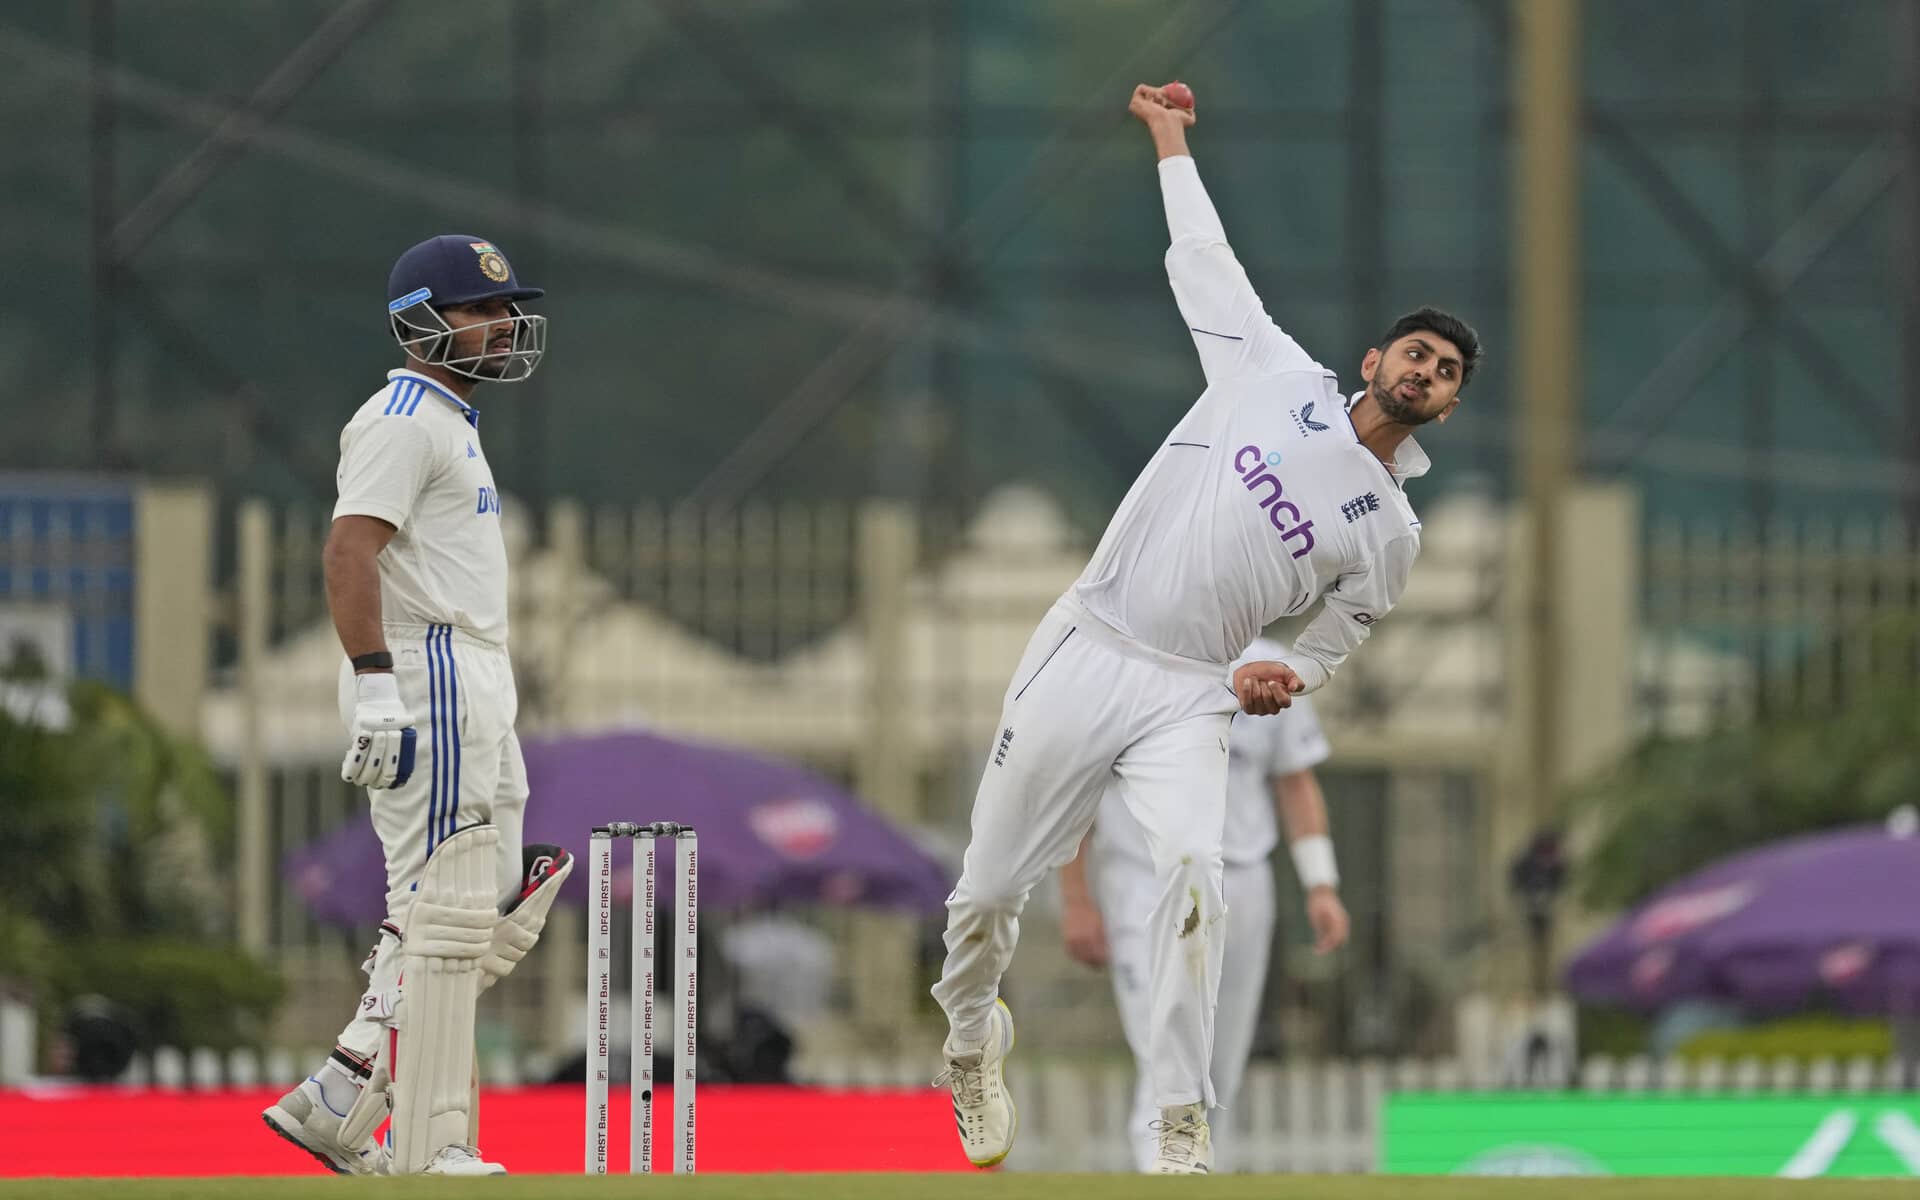 IND Vs ENG, 4th Test, Day 2: Live Score, Highlights, Match Updates & Live Streaming